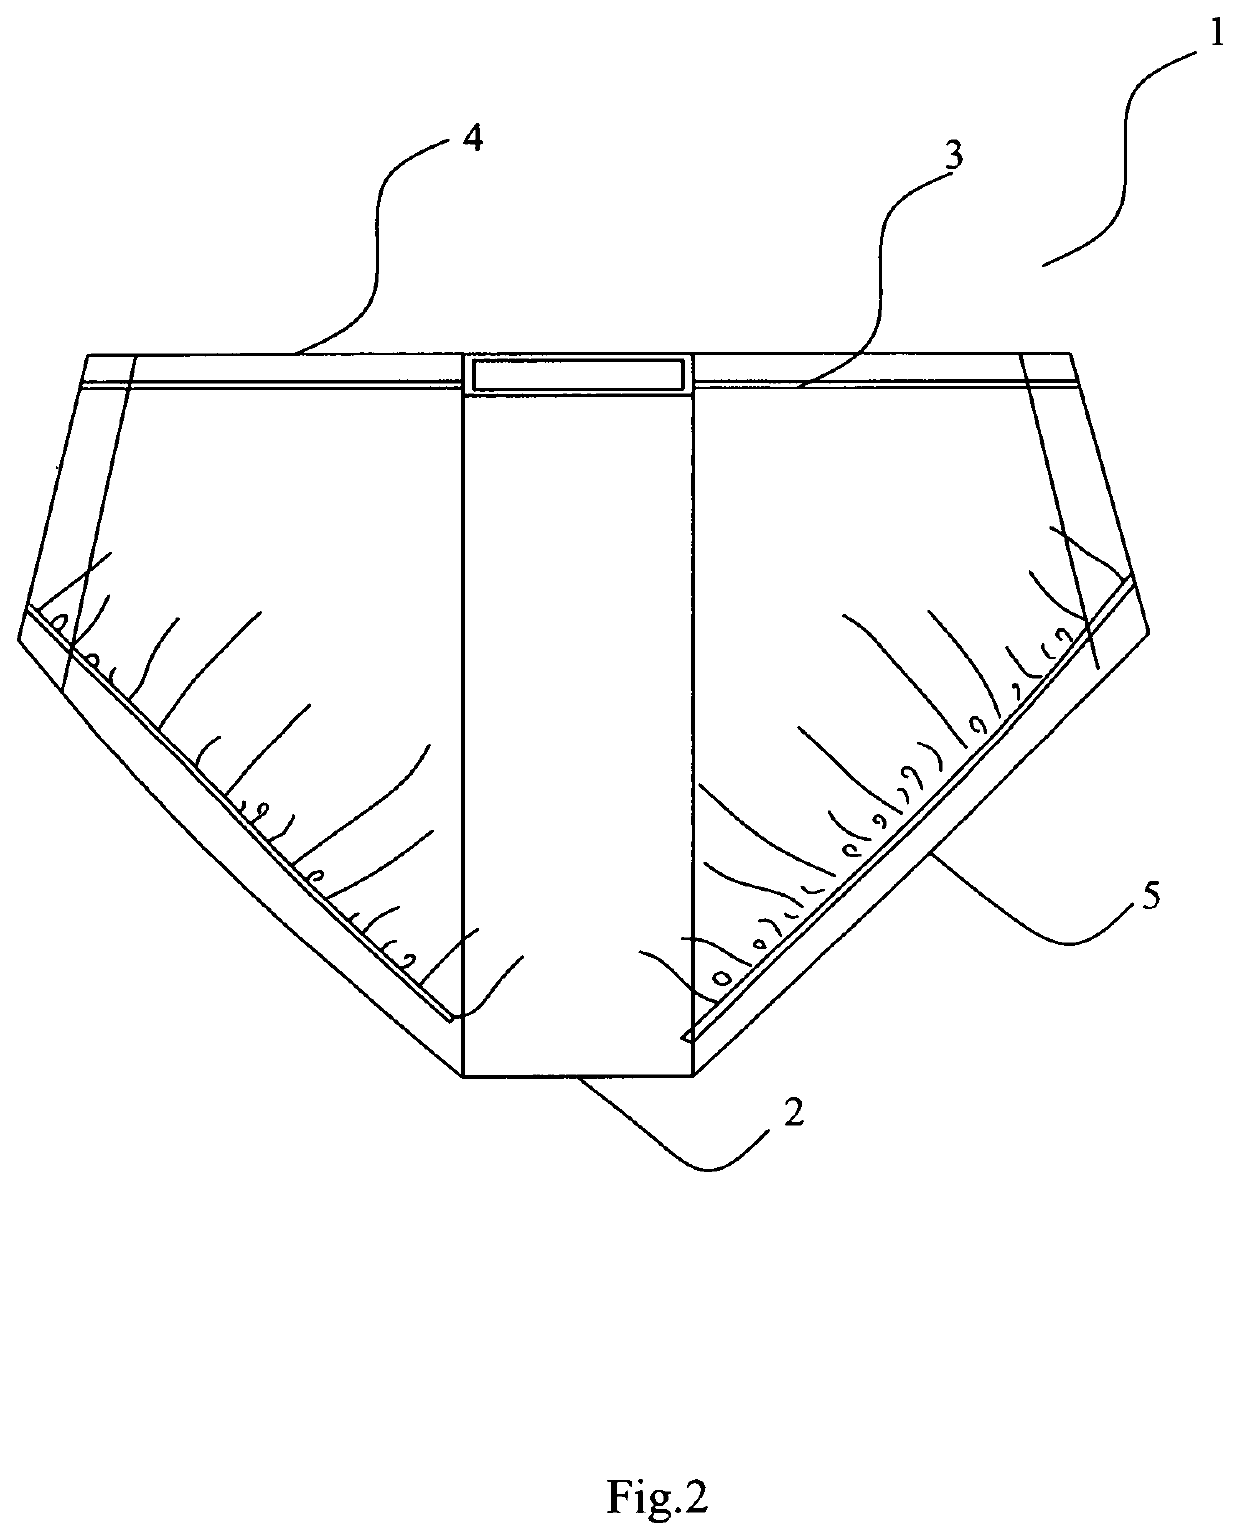 Attachable panties that promotes safety and attachable absorbency panels